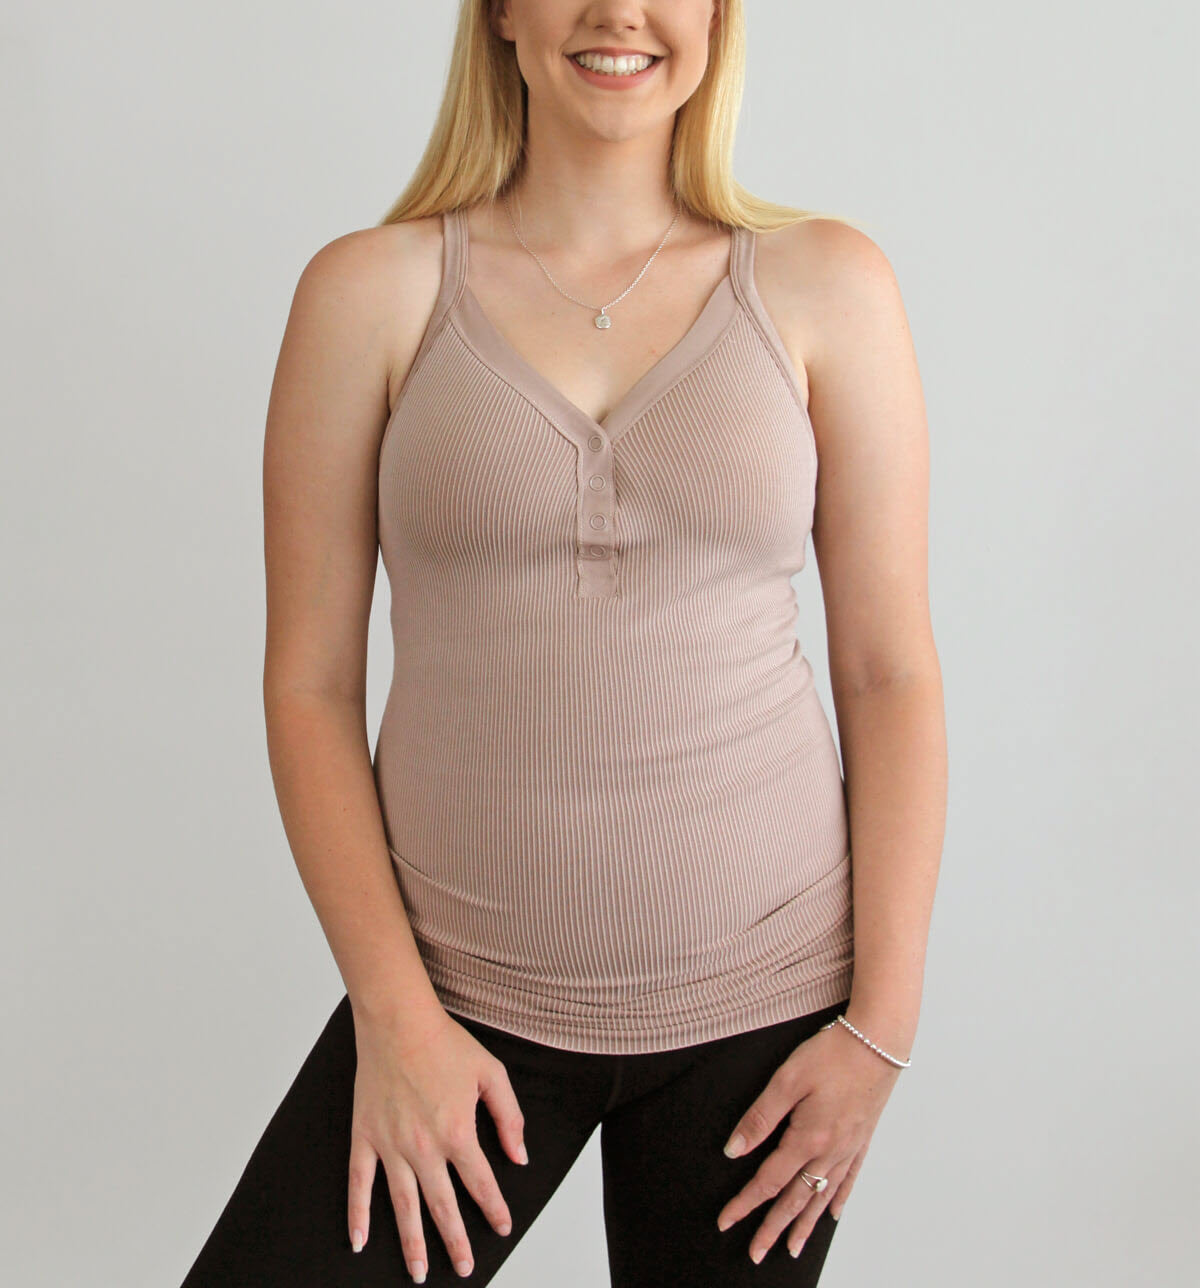 Cami Shaper by Genie Set of 3 Shaping Camisoles with Leah Williams 